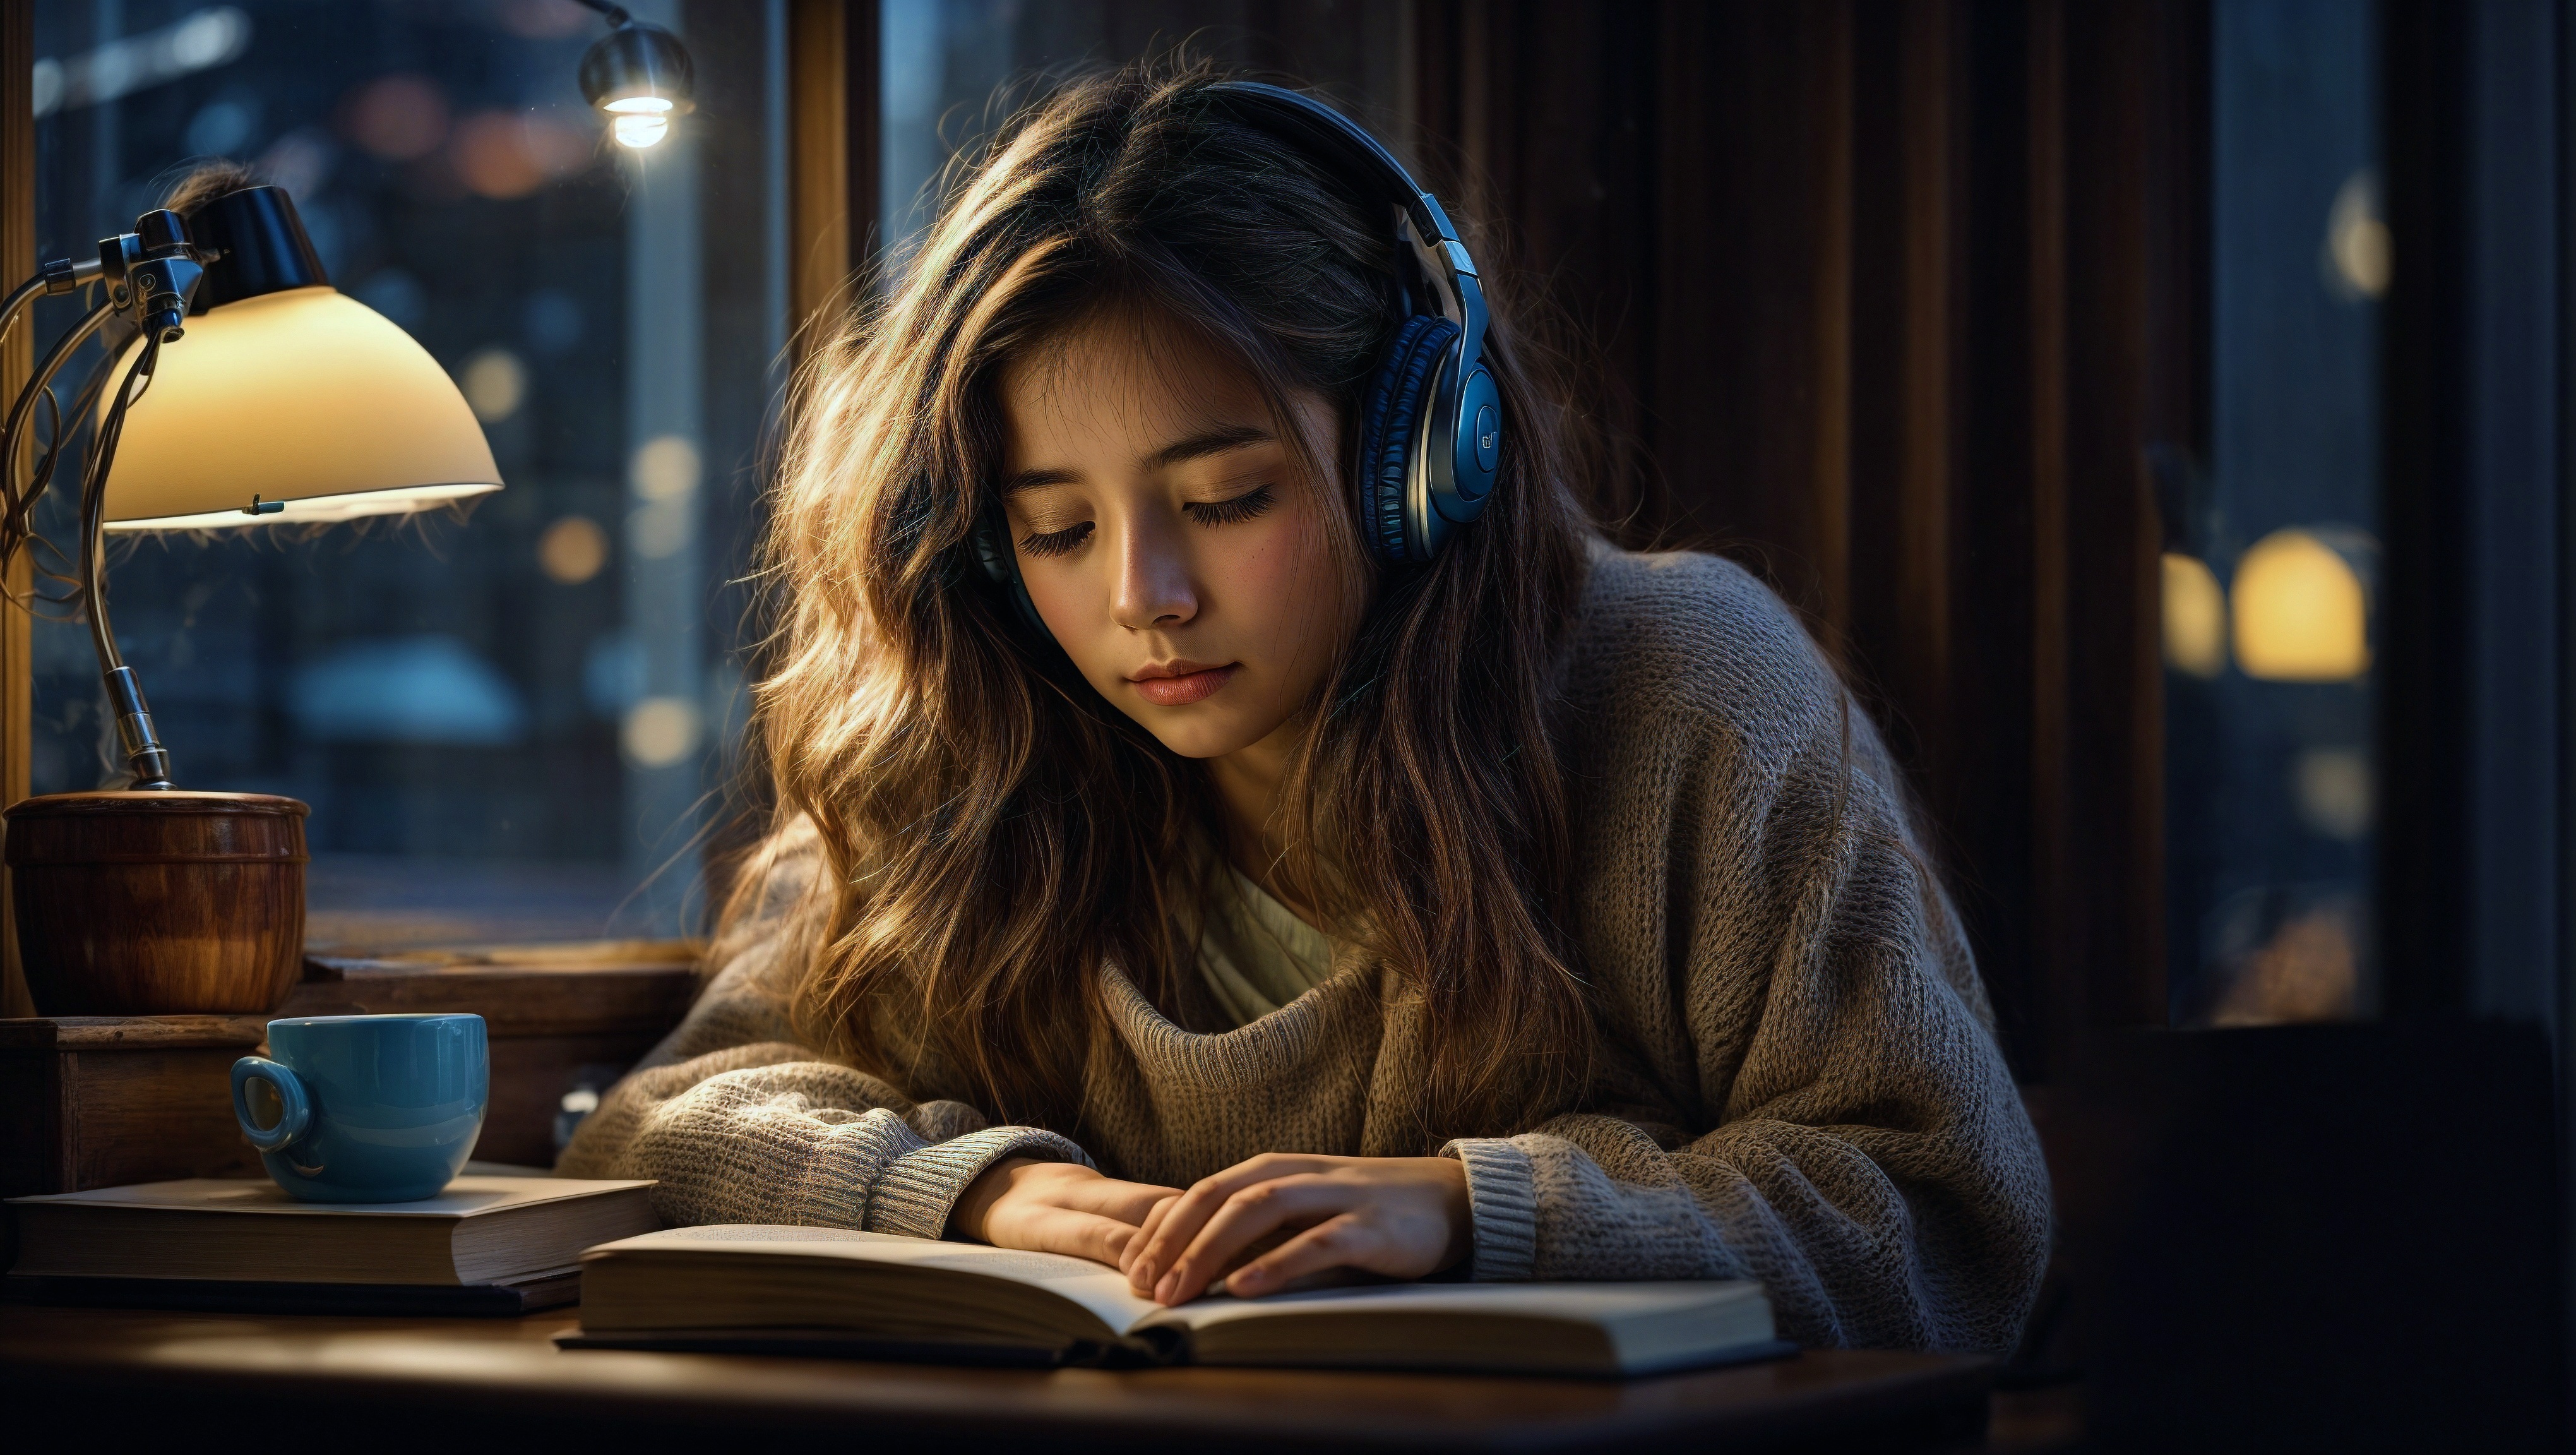 Free photo A woman in headphones laying down reading a book and drinking a cup of coffee